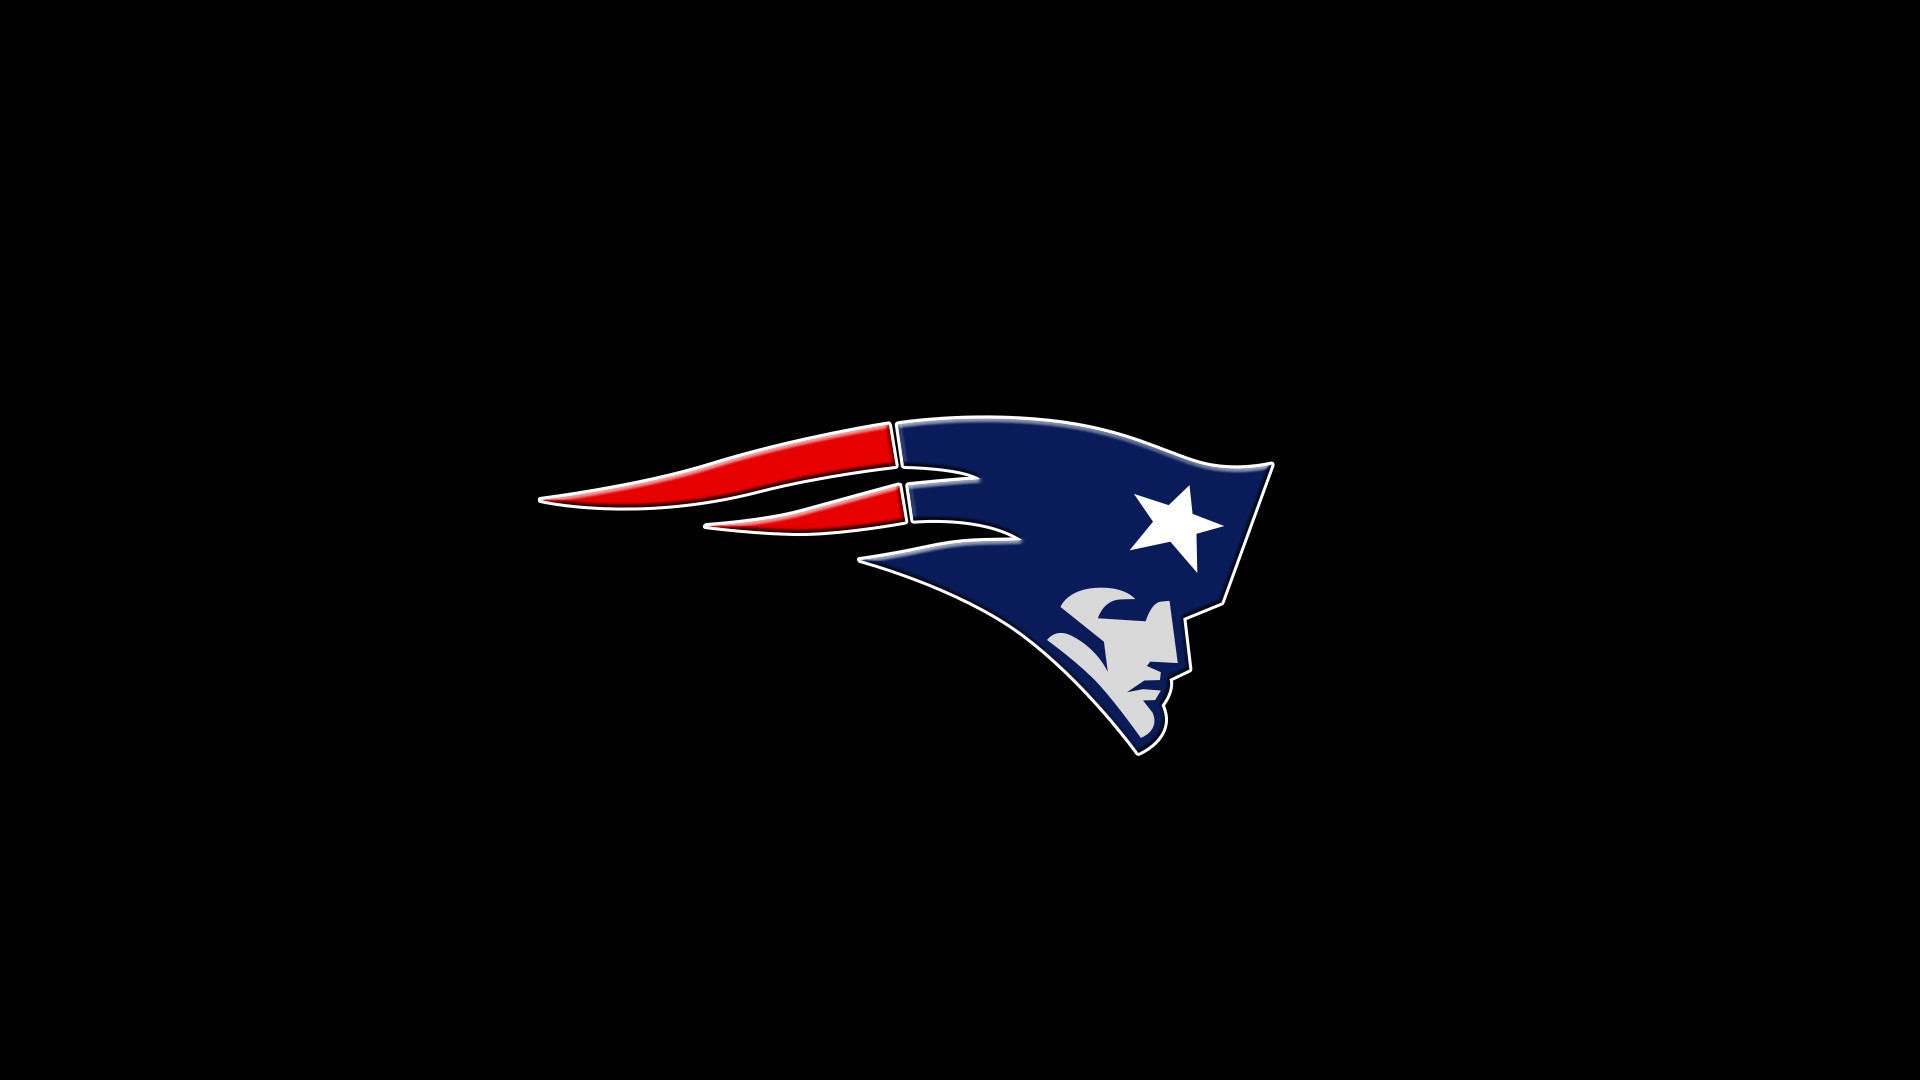 NE Patriots For Desktop Wallpaper With Resolution 1920X1080 pixel. You can make this wallpaper for your Mac or Windows Desktop Background, iPhone, Android or Tablet and another Smartphone device for free